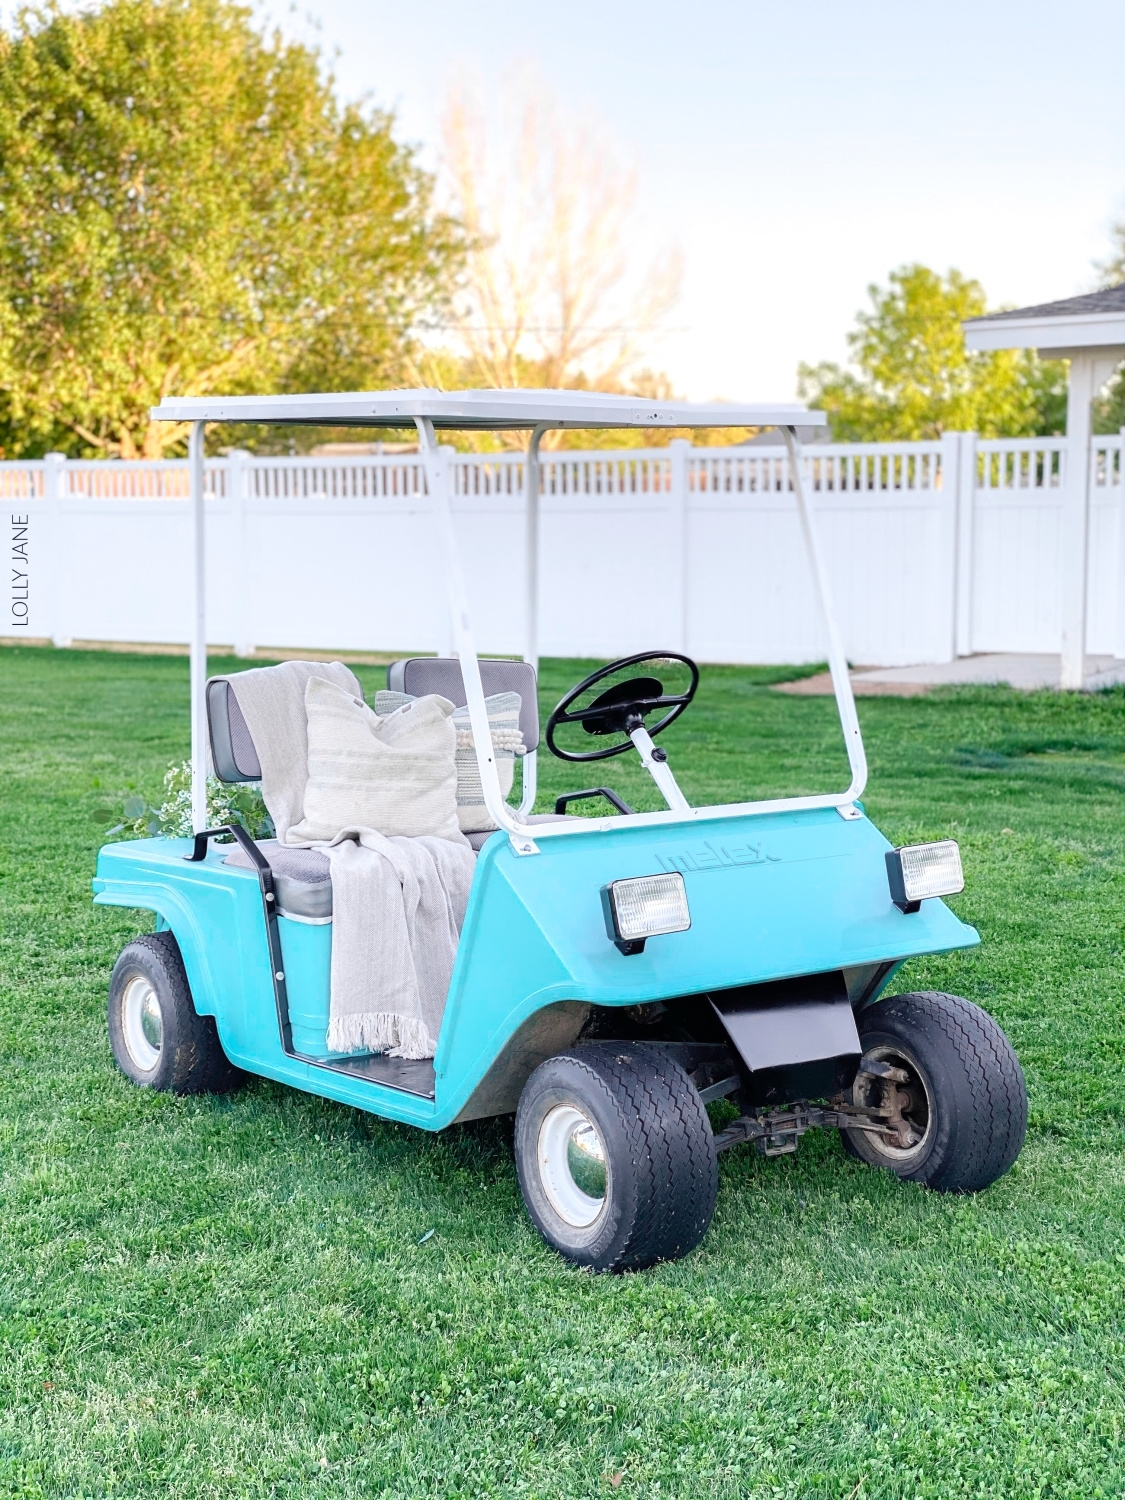 Restored Golf Cart with Spray Paint